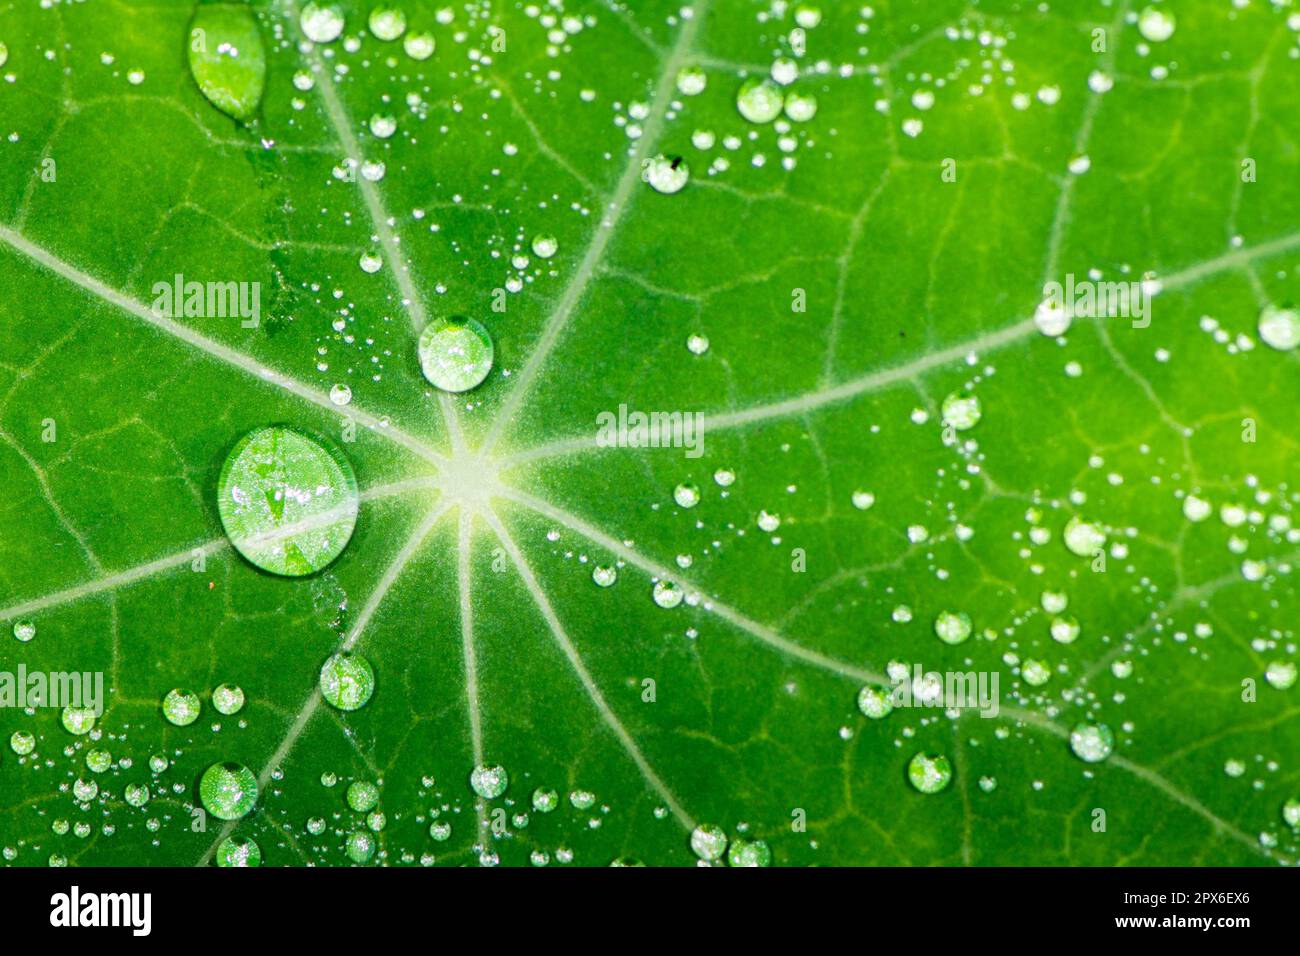 Background with a green leaf full of water drops Stock Photo